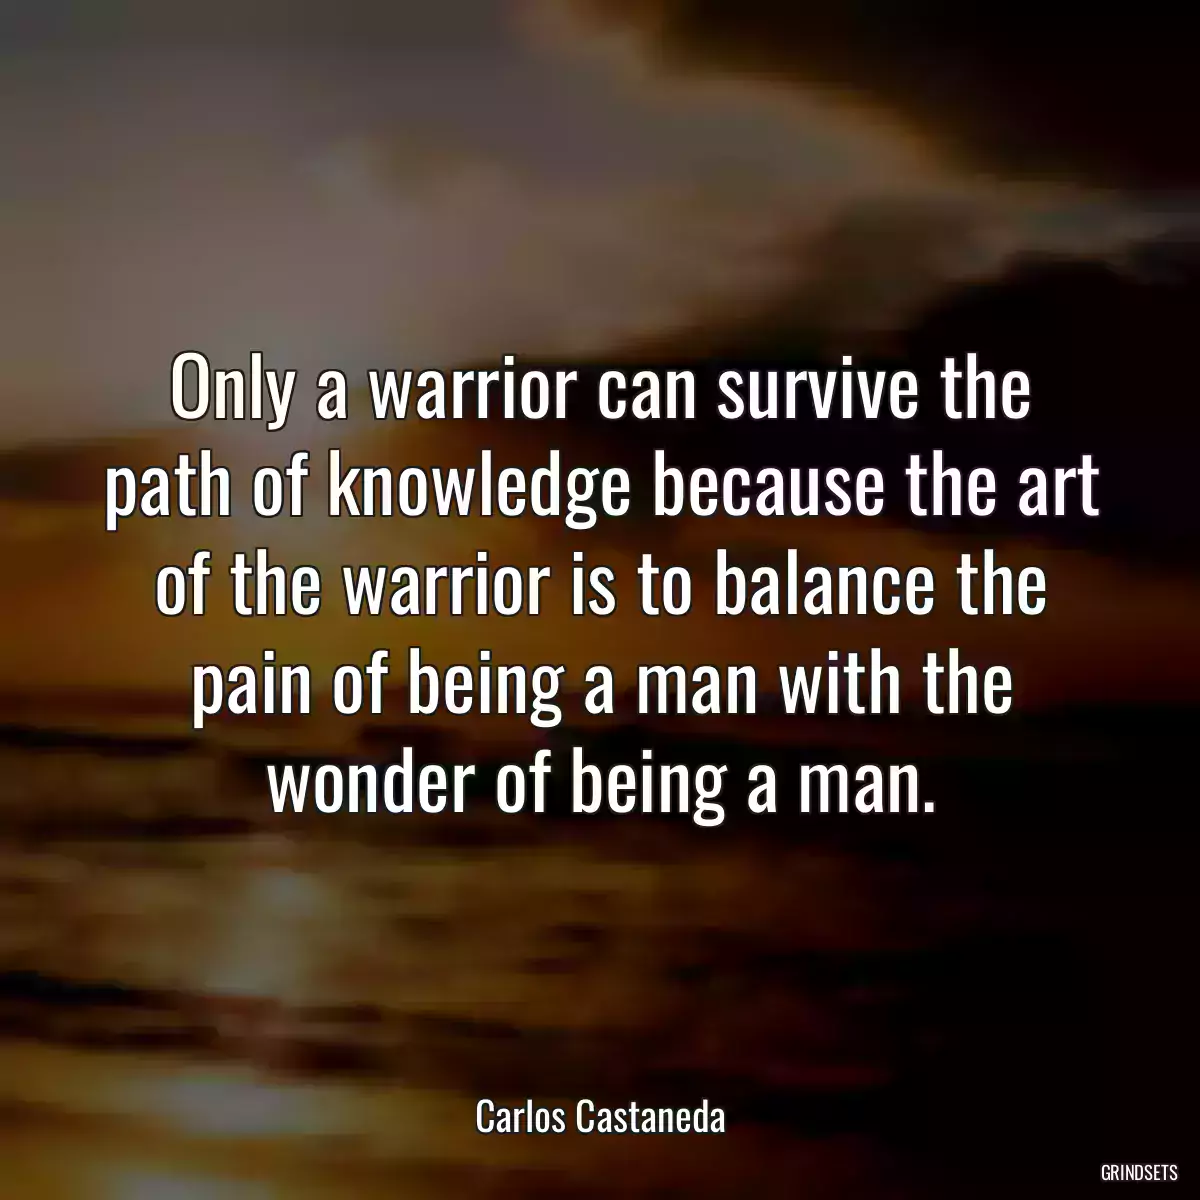 Only a warrior can survive the path of knowledge because the art of the warrior is to balance the pain of being a man with the wonder of being a man.